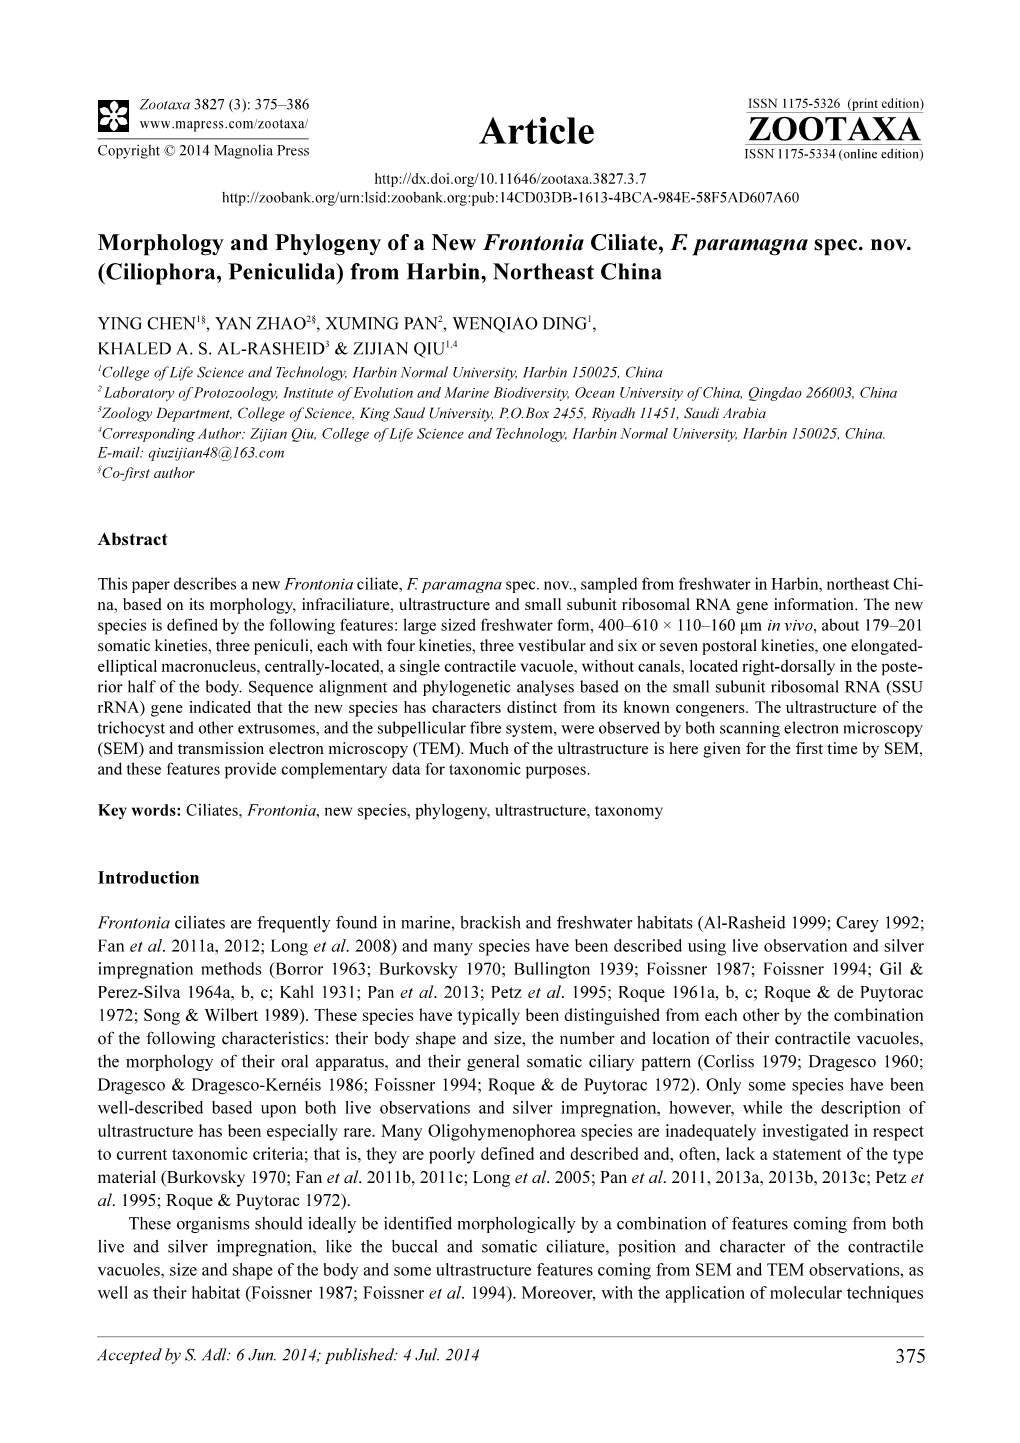 Morphology and Phylogeny of a New Frontonia Ciliate, F